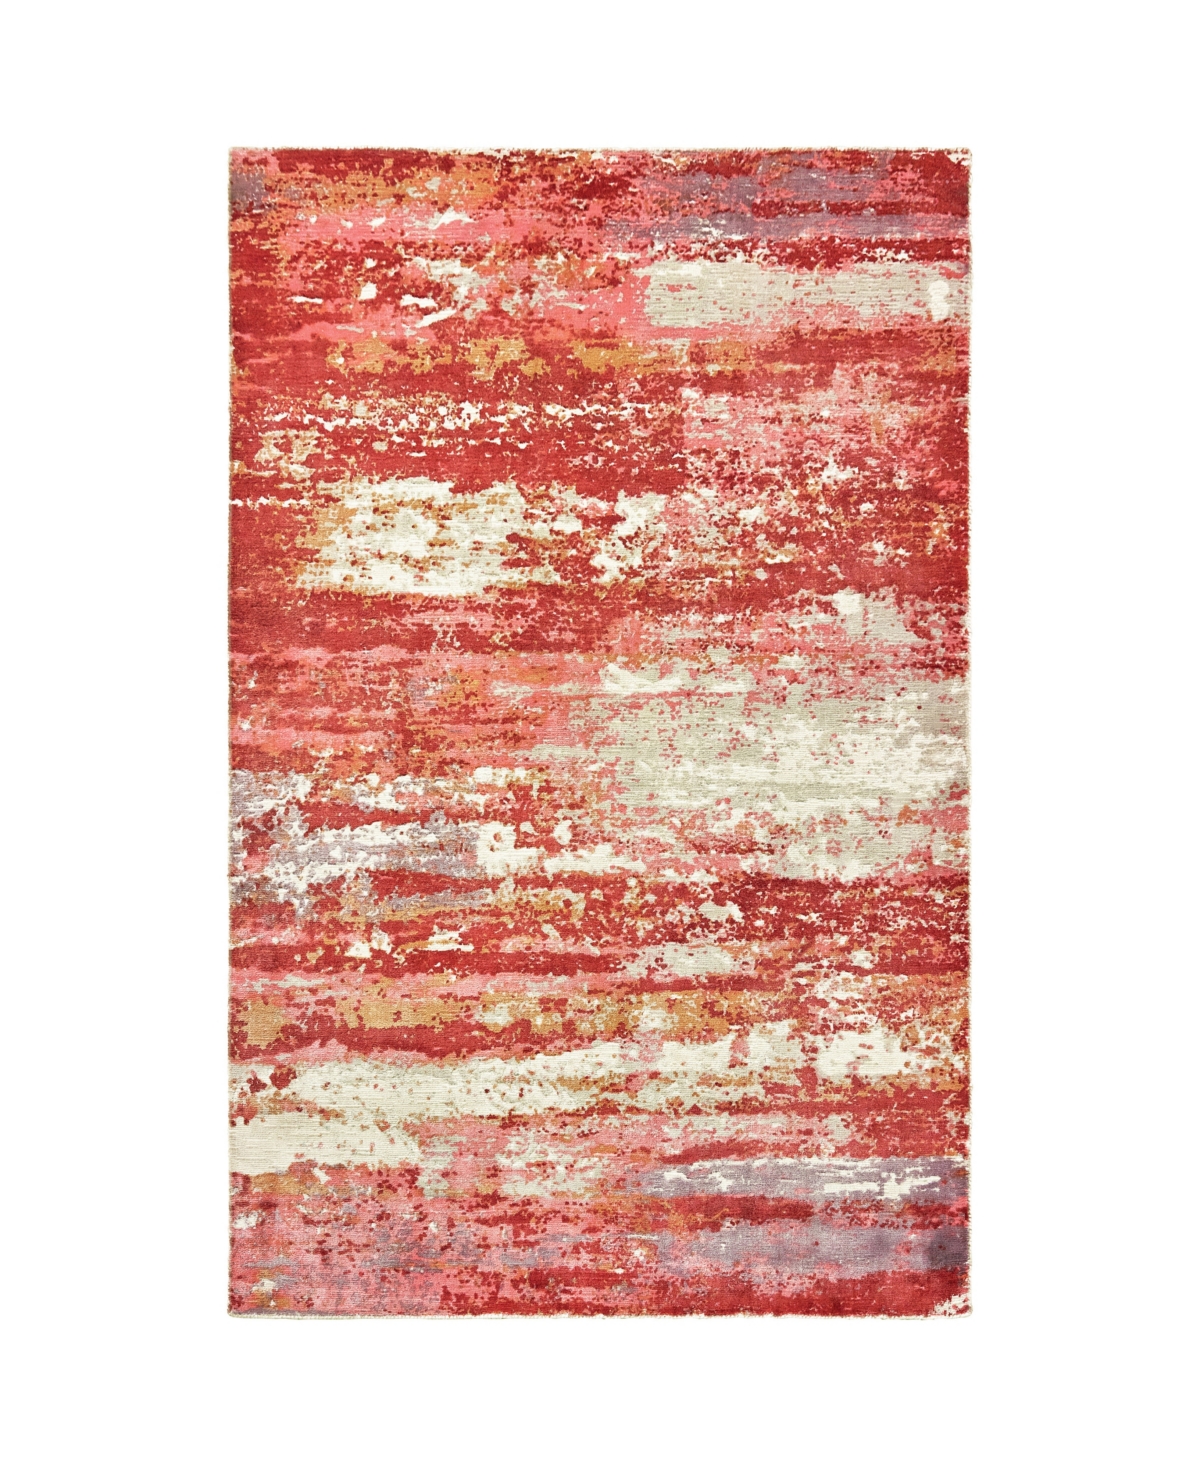 Jhb Design Creation CRE04 Pink 8' x 10' Area Rug - Red